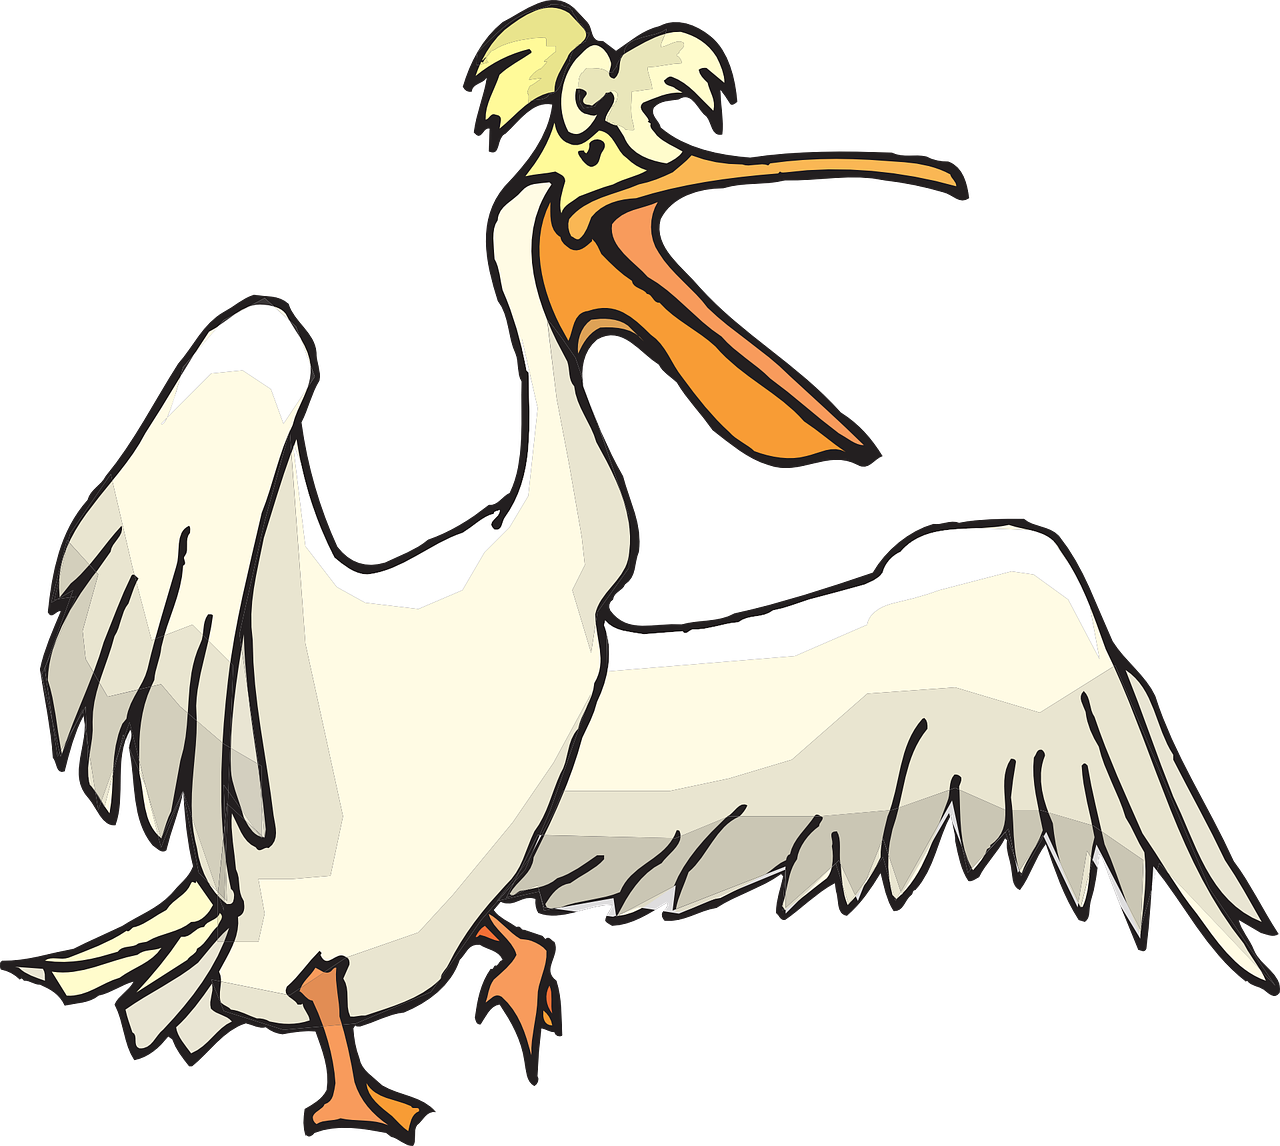 pelican clipart animated